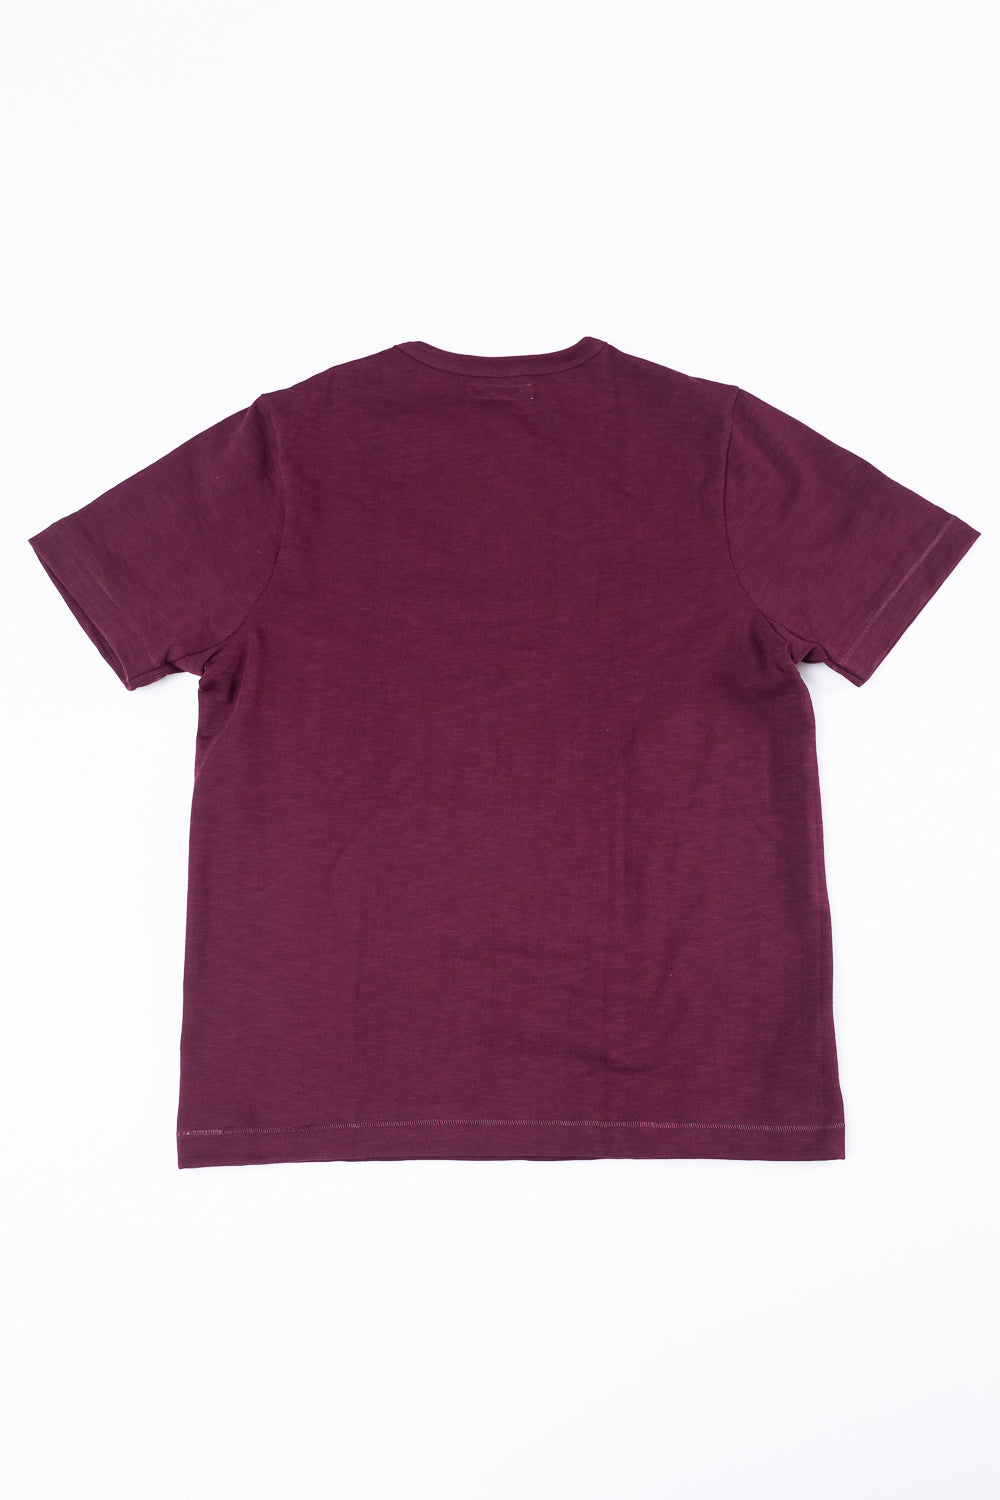 2S14.507 - 13.4oz Loopwheeled Heavy T-Shirt Relaxed Fit - Ruby Red